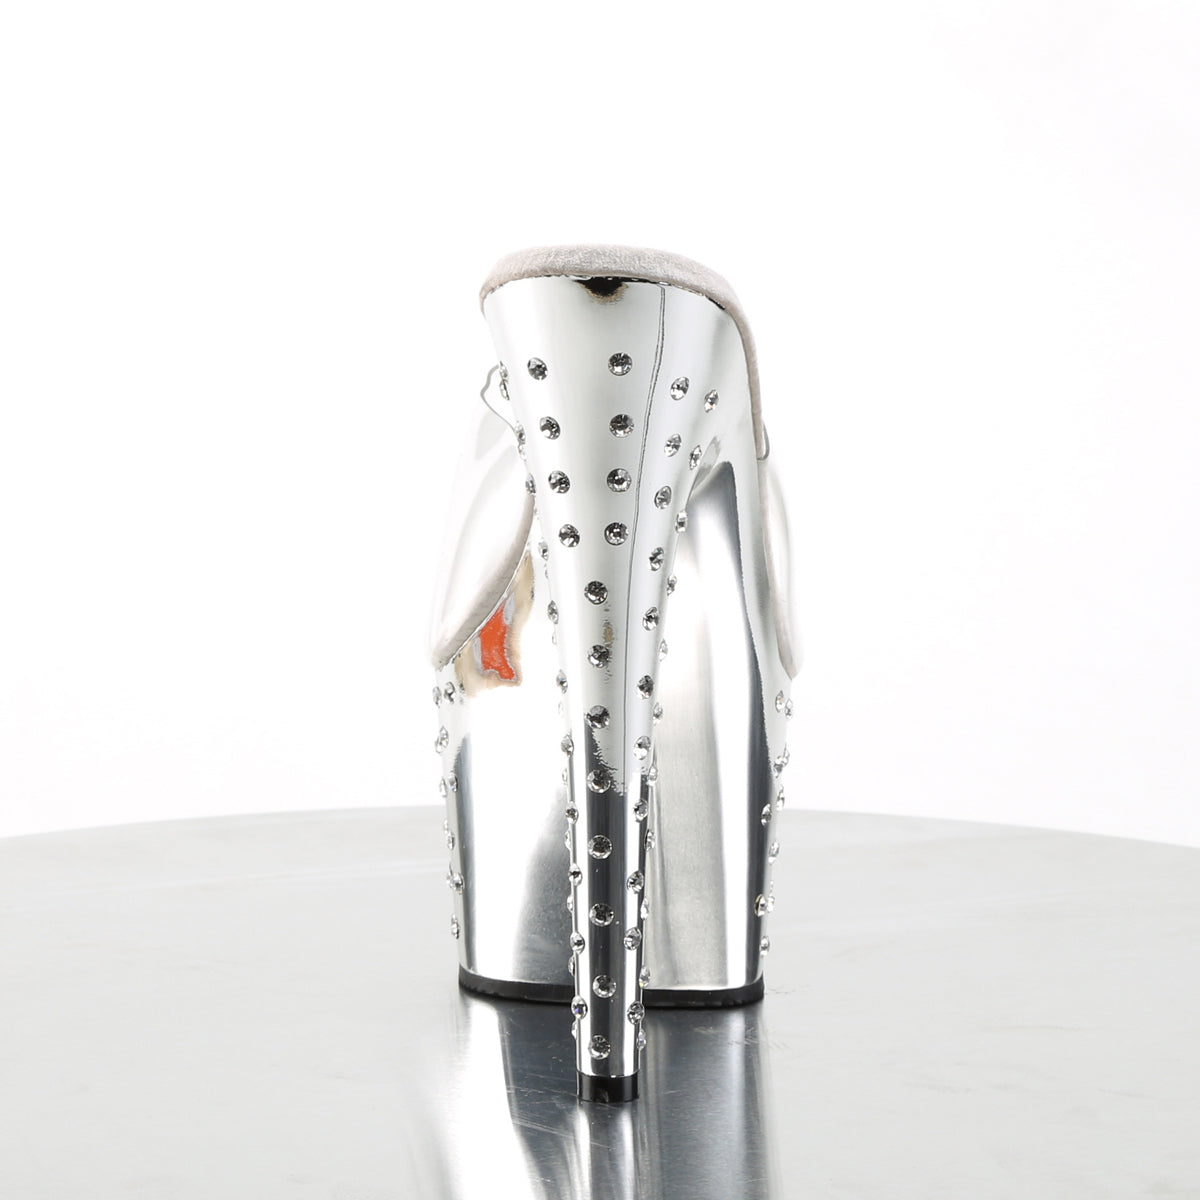 STARDUST-701 7 Inch Heel ClearSilver Chrome Strippers Shoes-Pleaser- Sexy Shoes Fetish Footwear